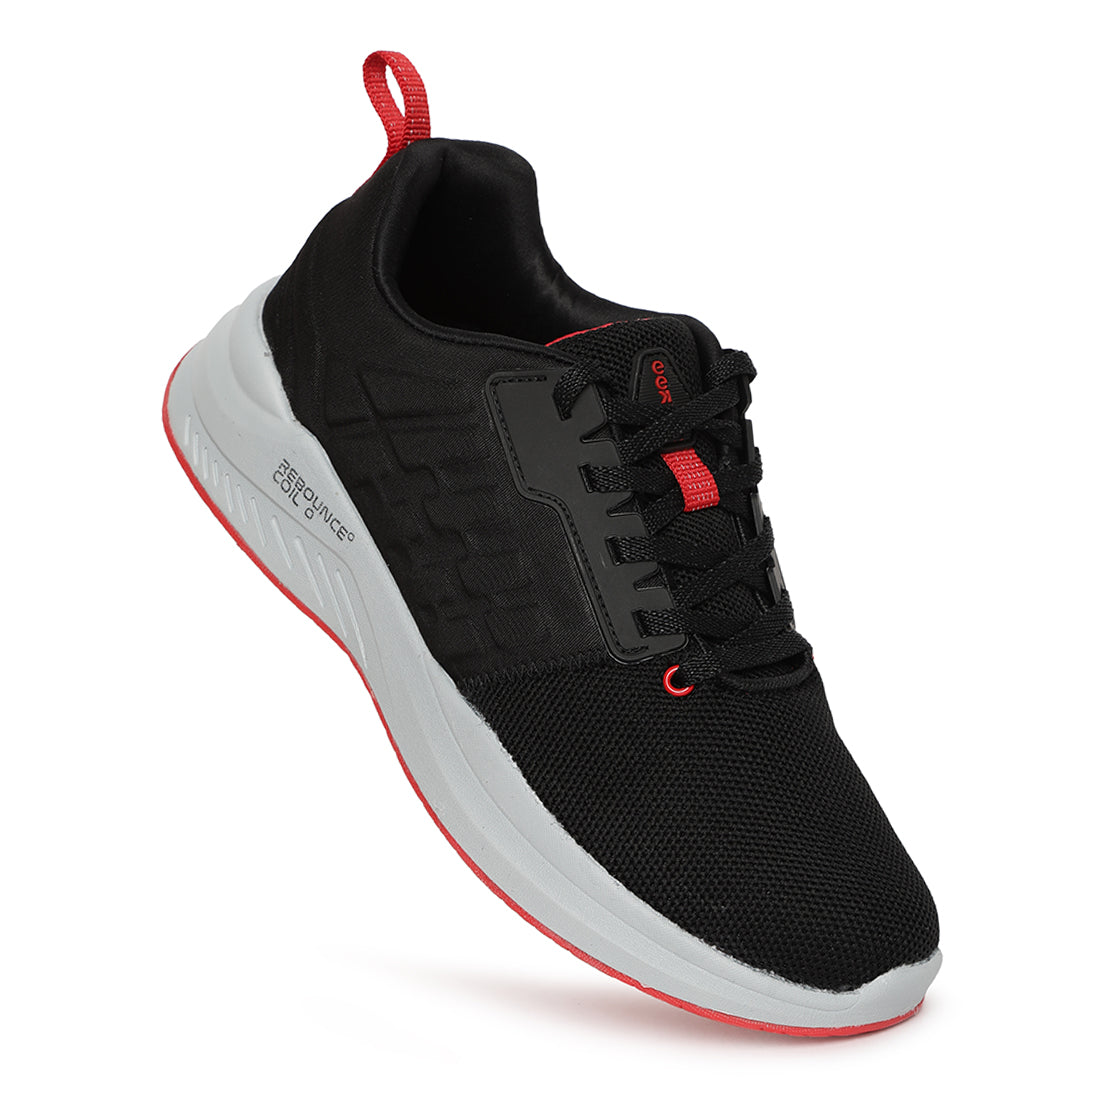 Eeken ESHGIA111 Black And Red Athleisure Shoes For Men